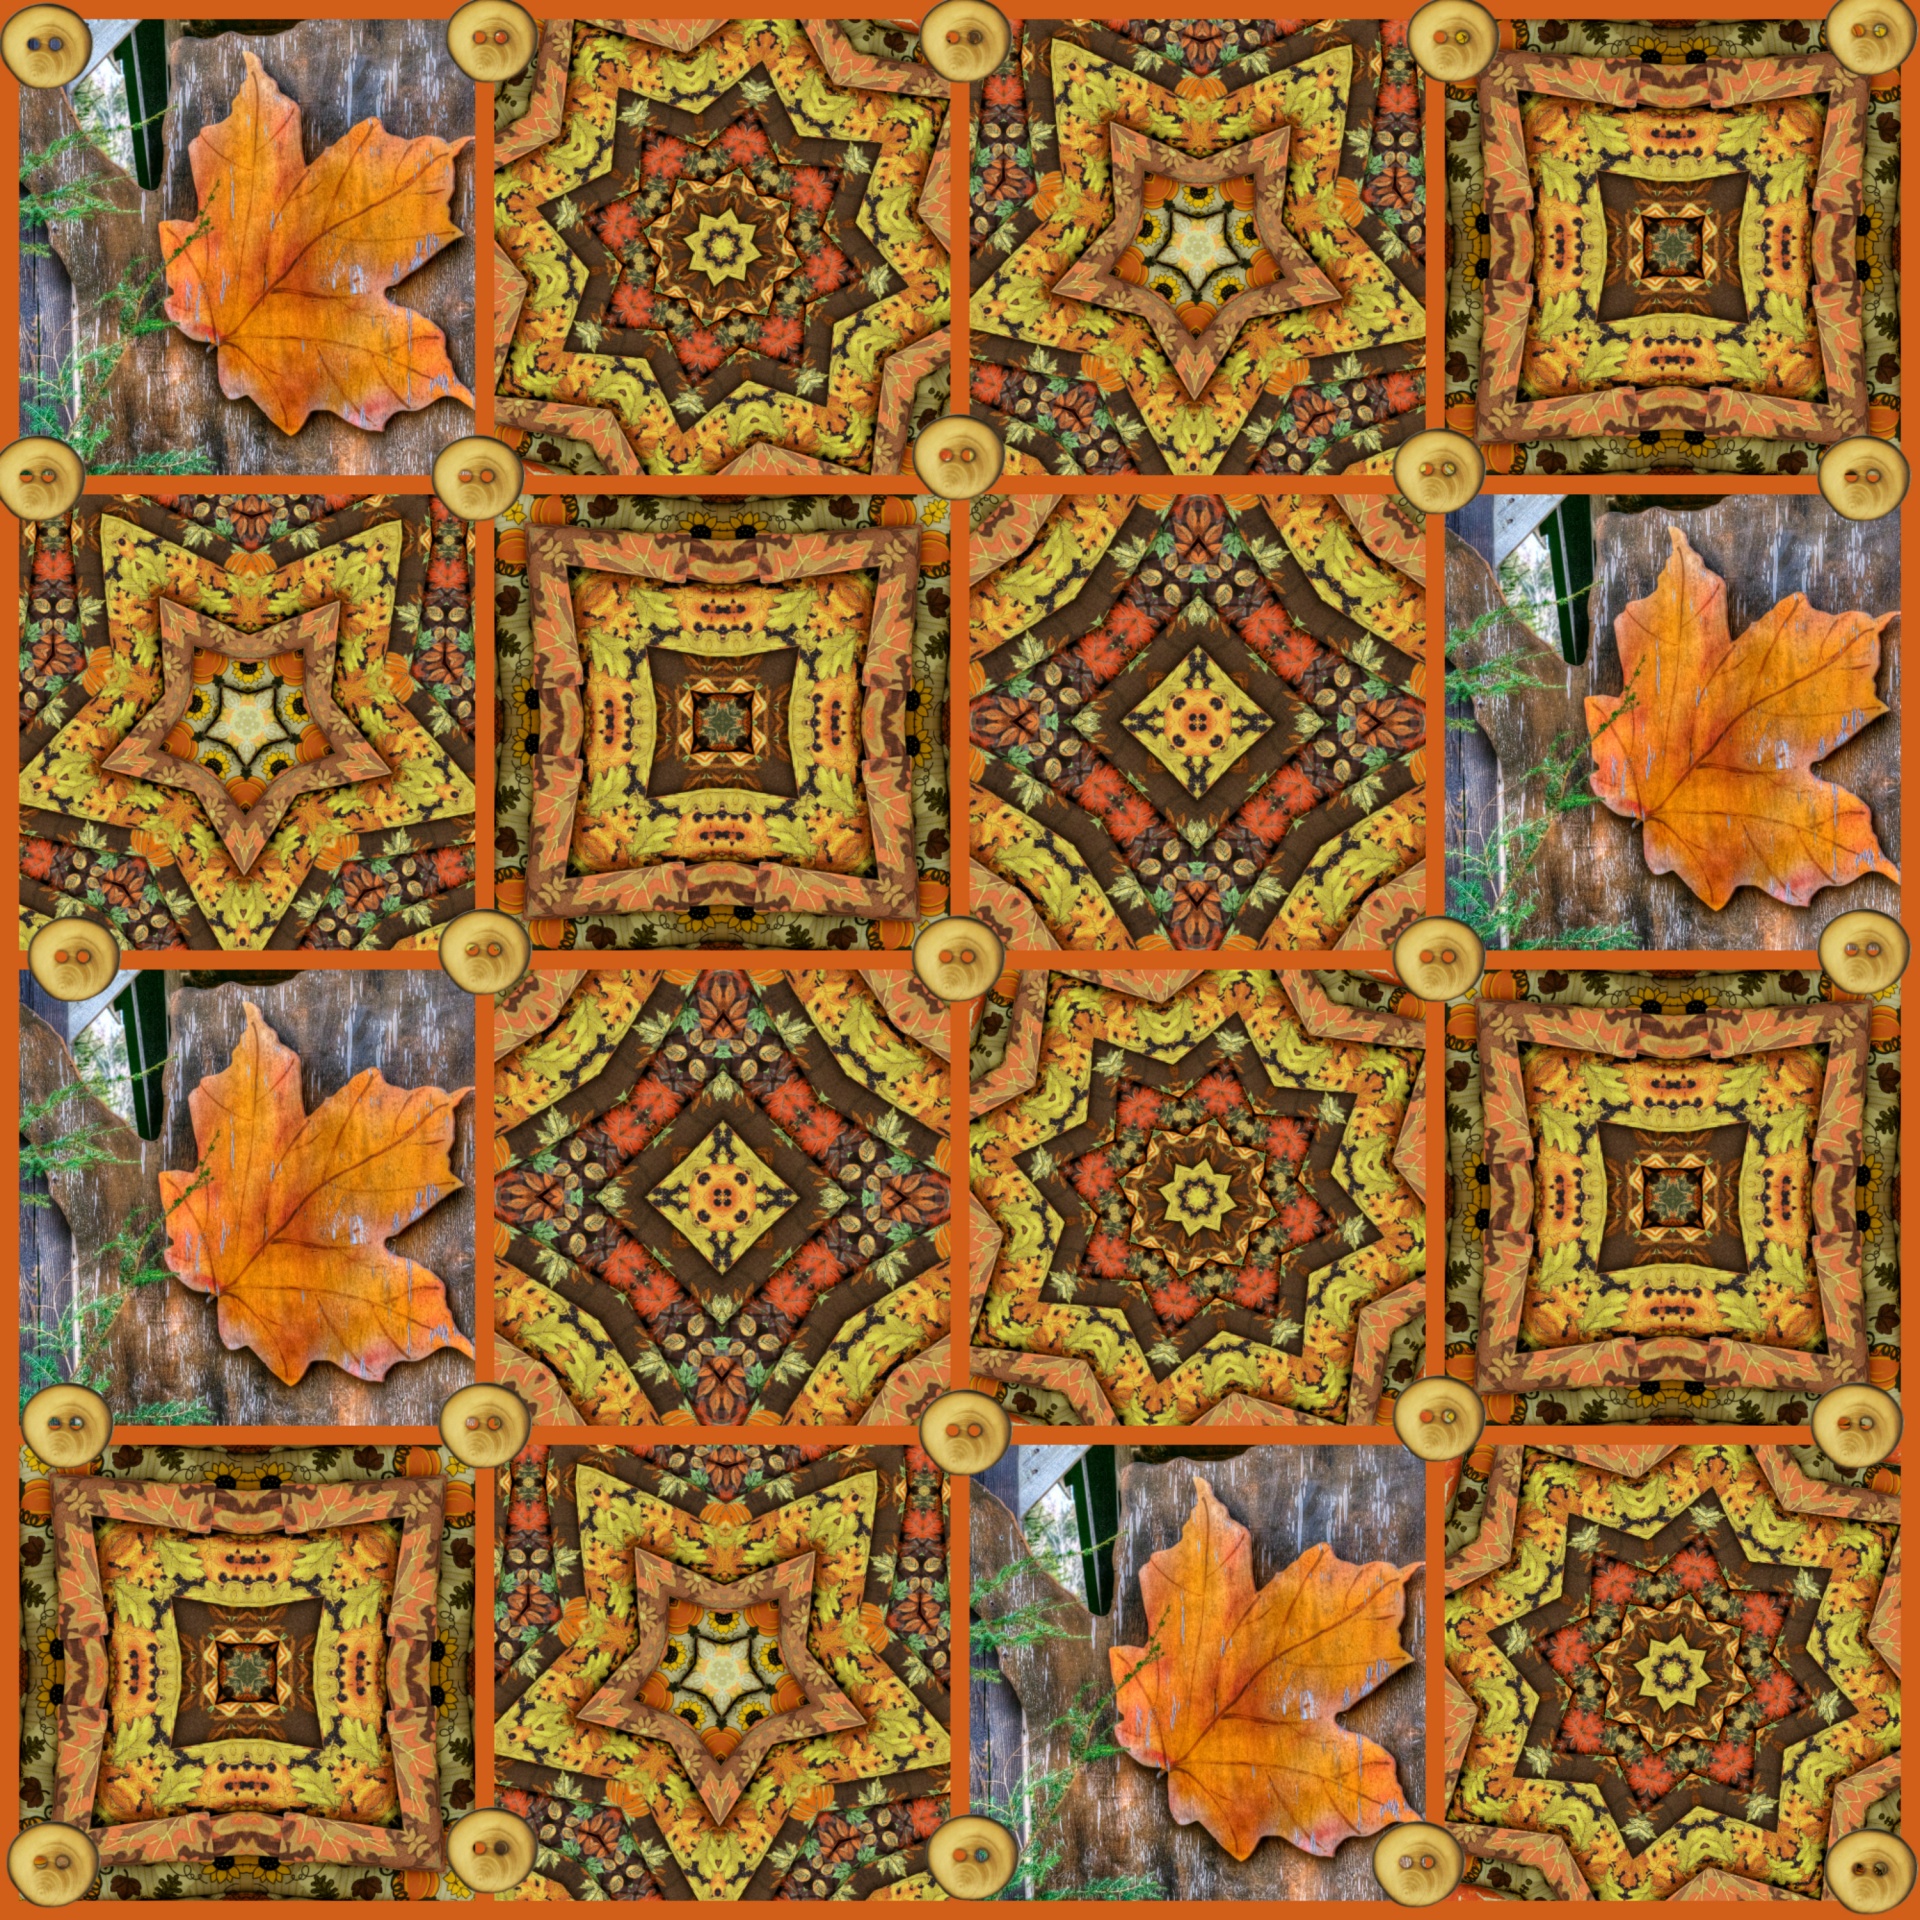 Fall Collage